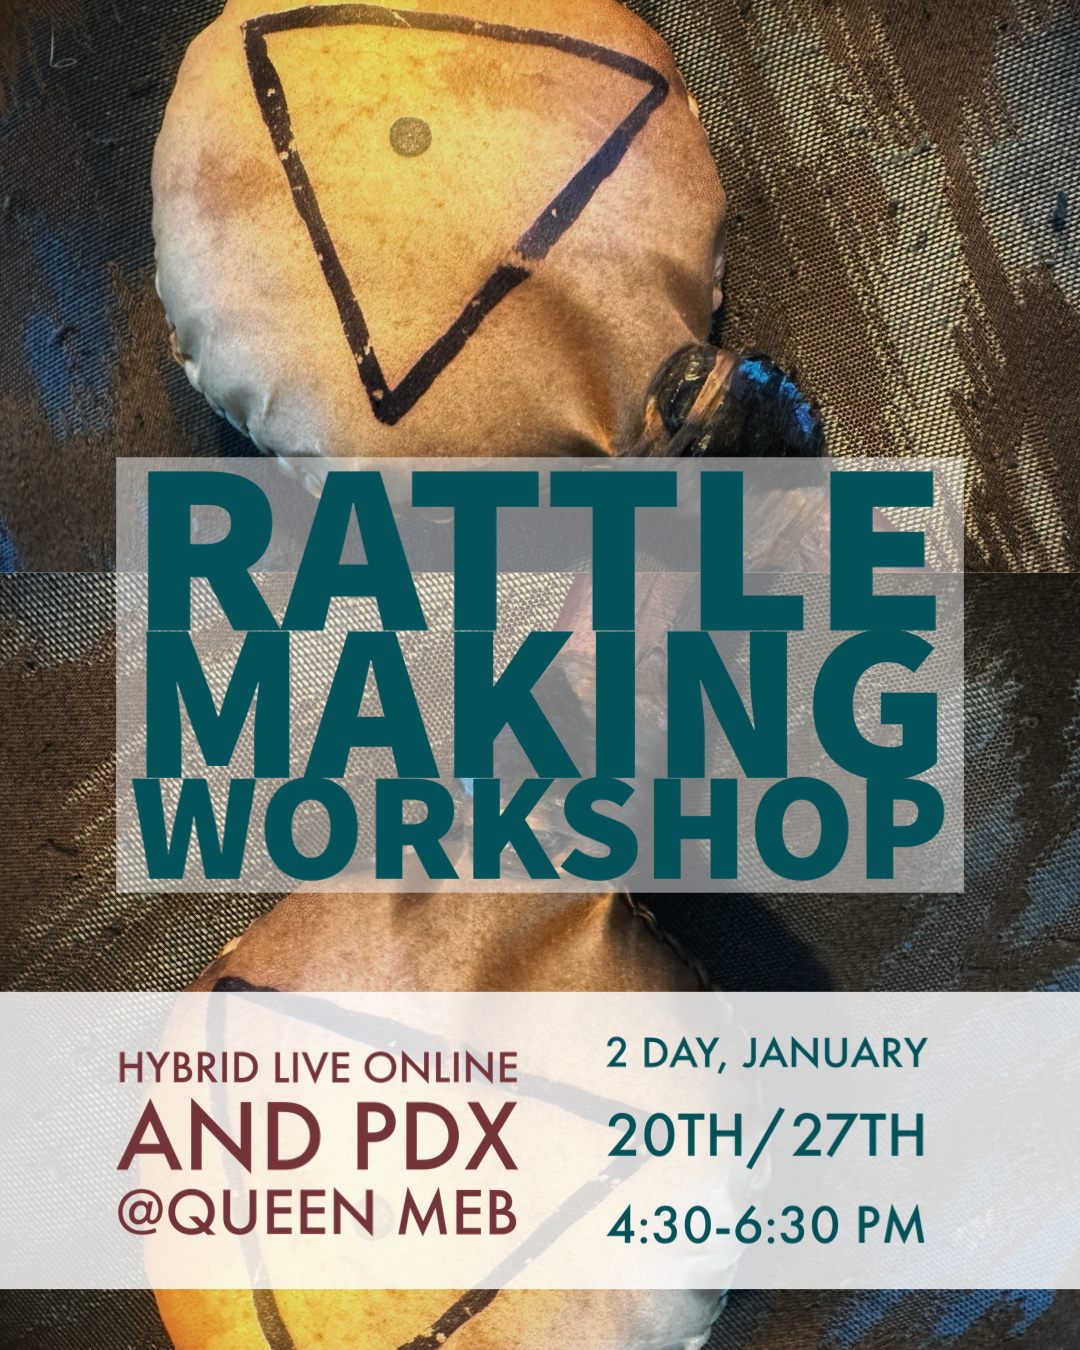 Hybrid Live (Online) and In-Person Rattle Making Workshop, January 20th and 27th - w/ The House of Twigs